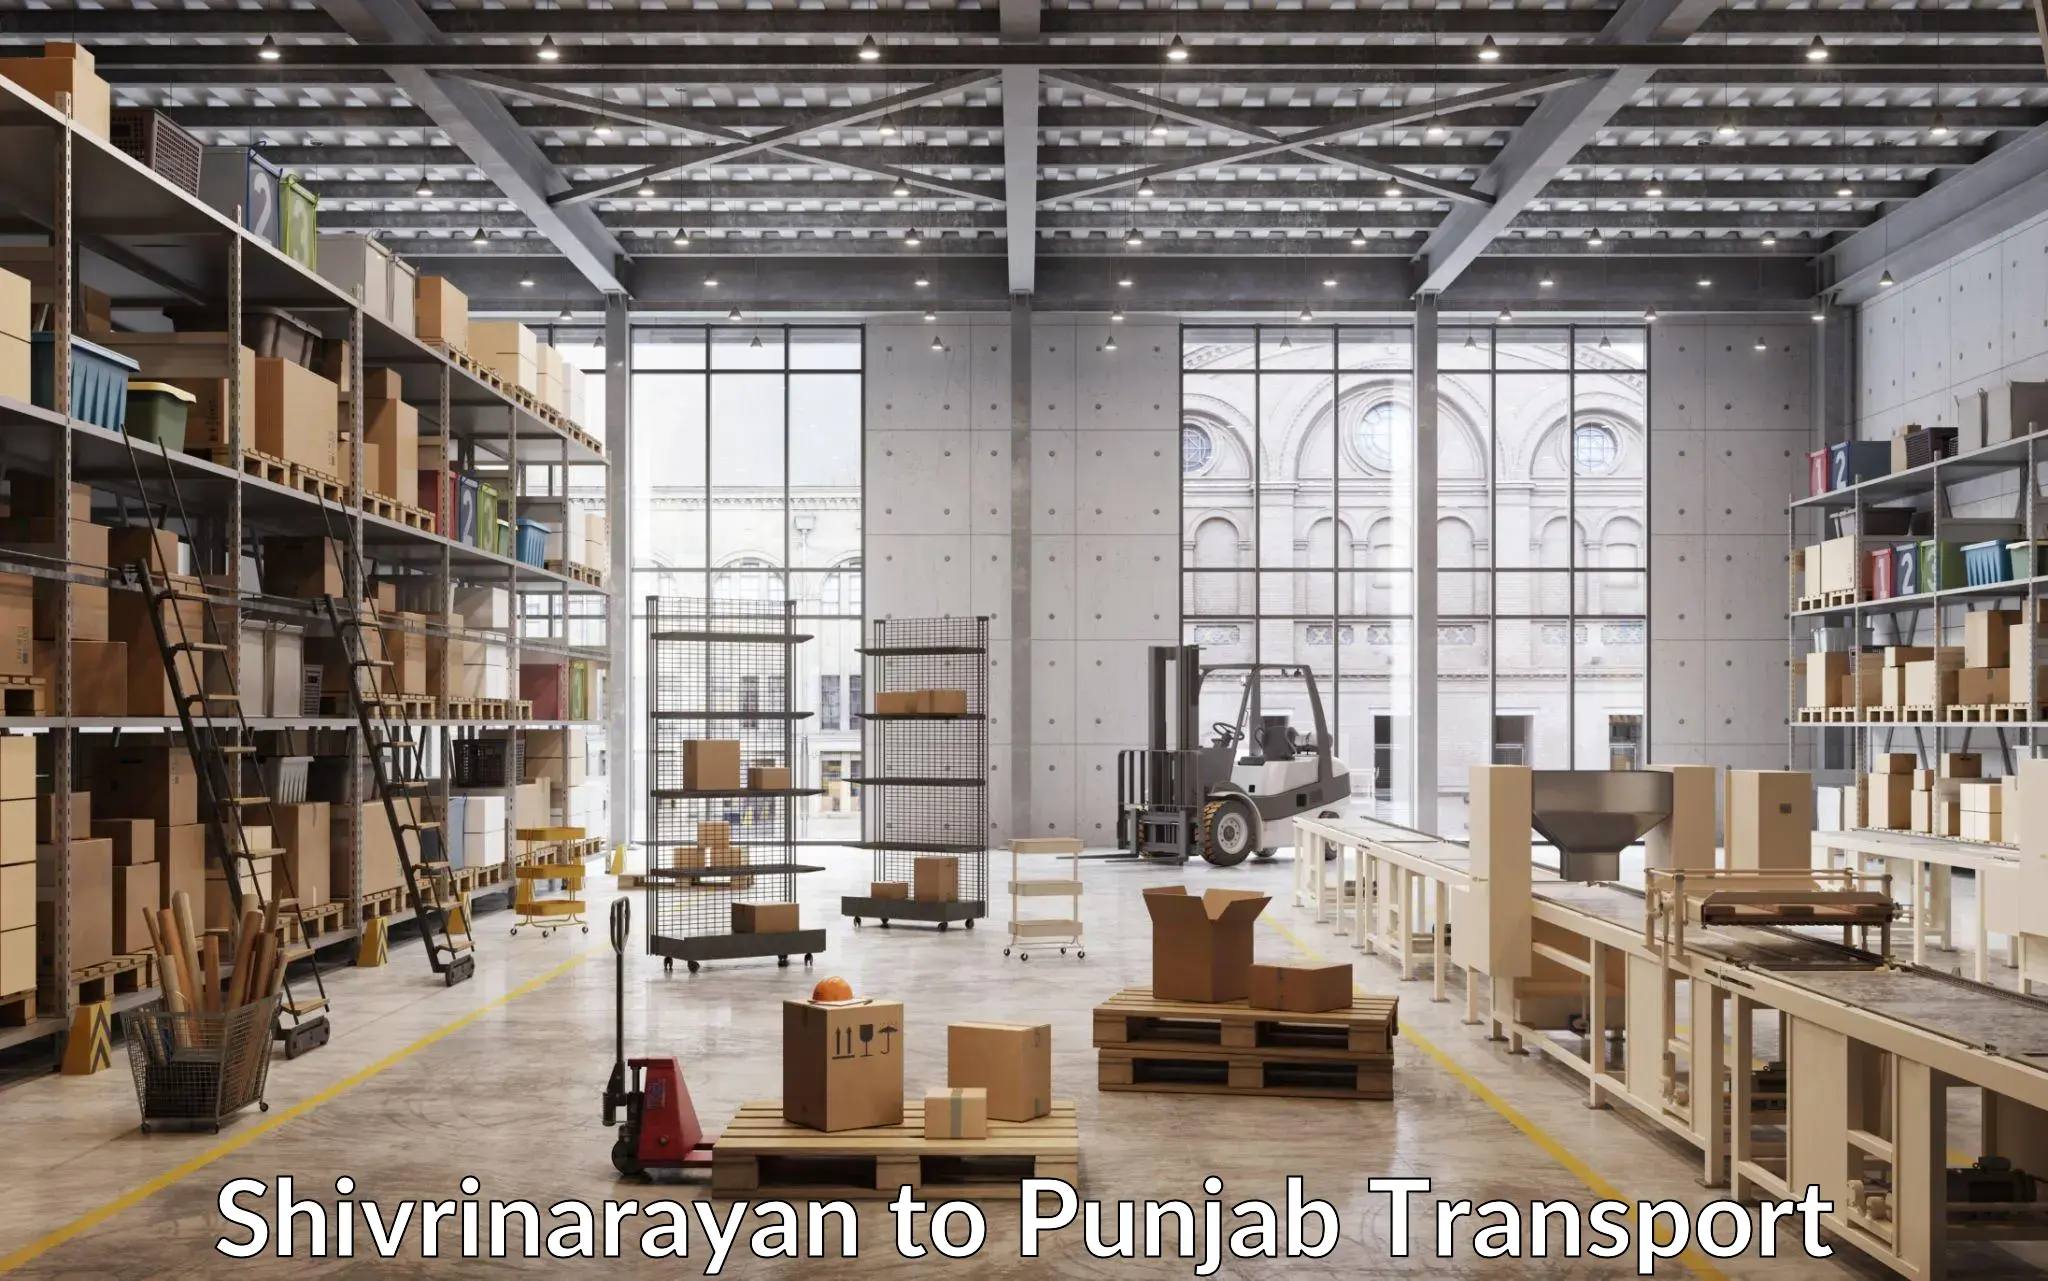 Transport bike from one state to another in Shivrinarayan to Punjab